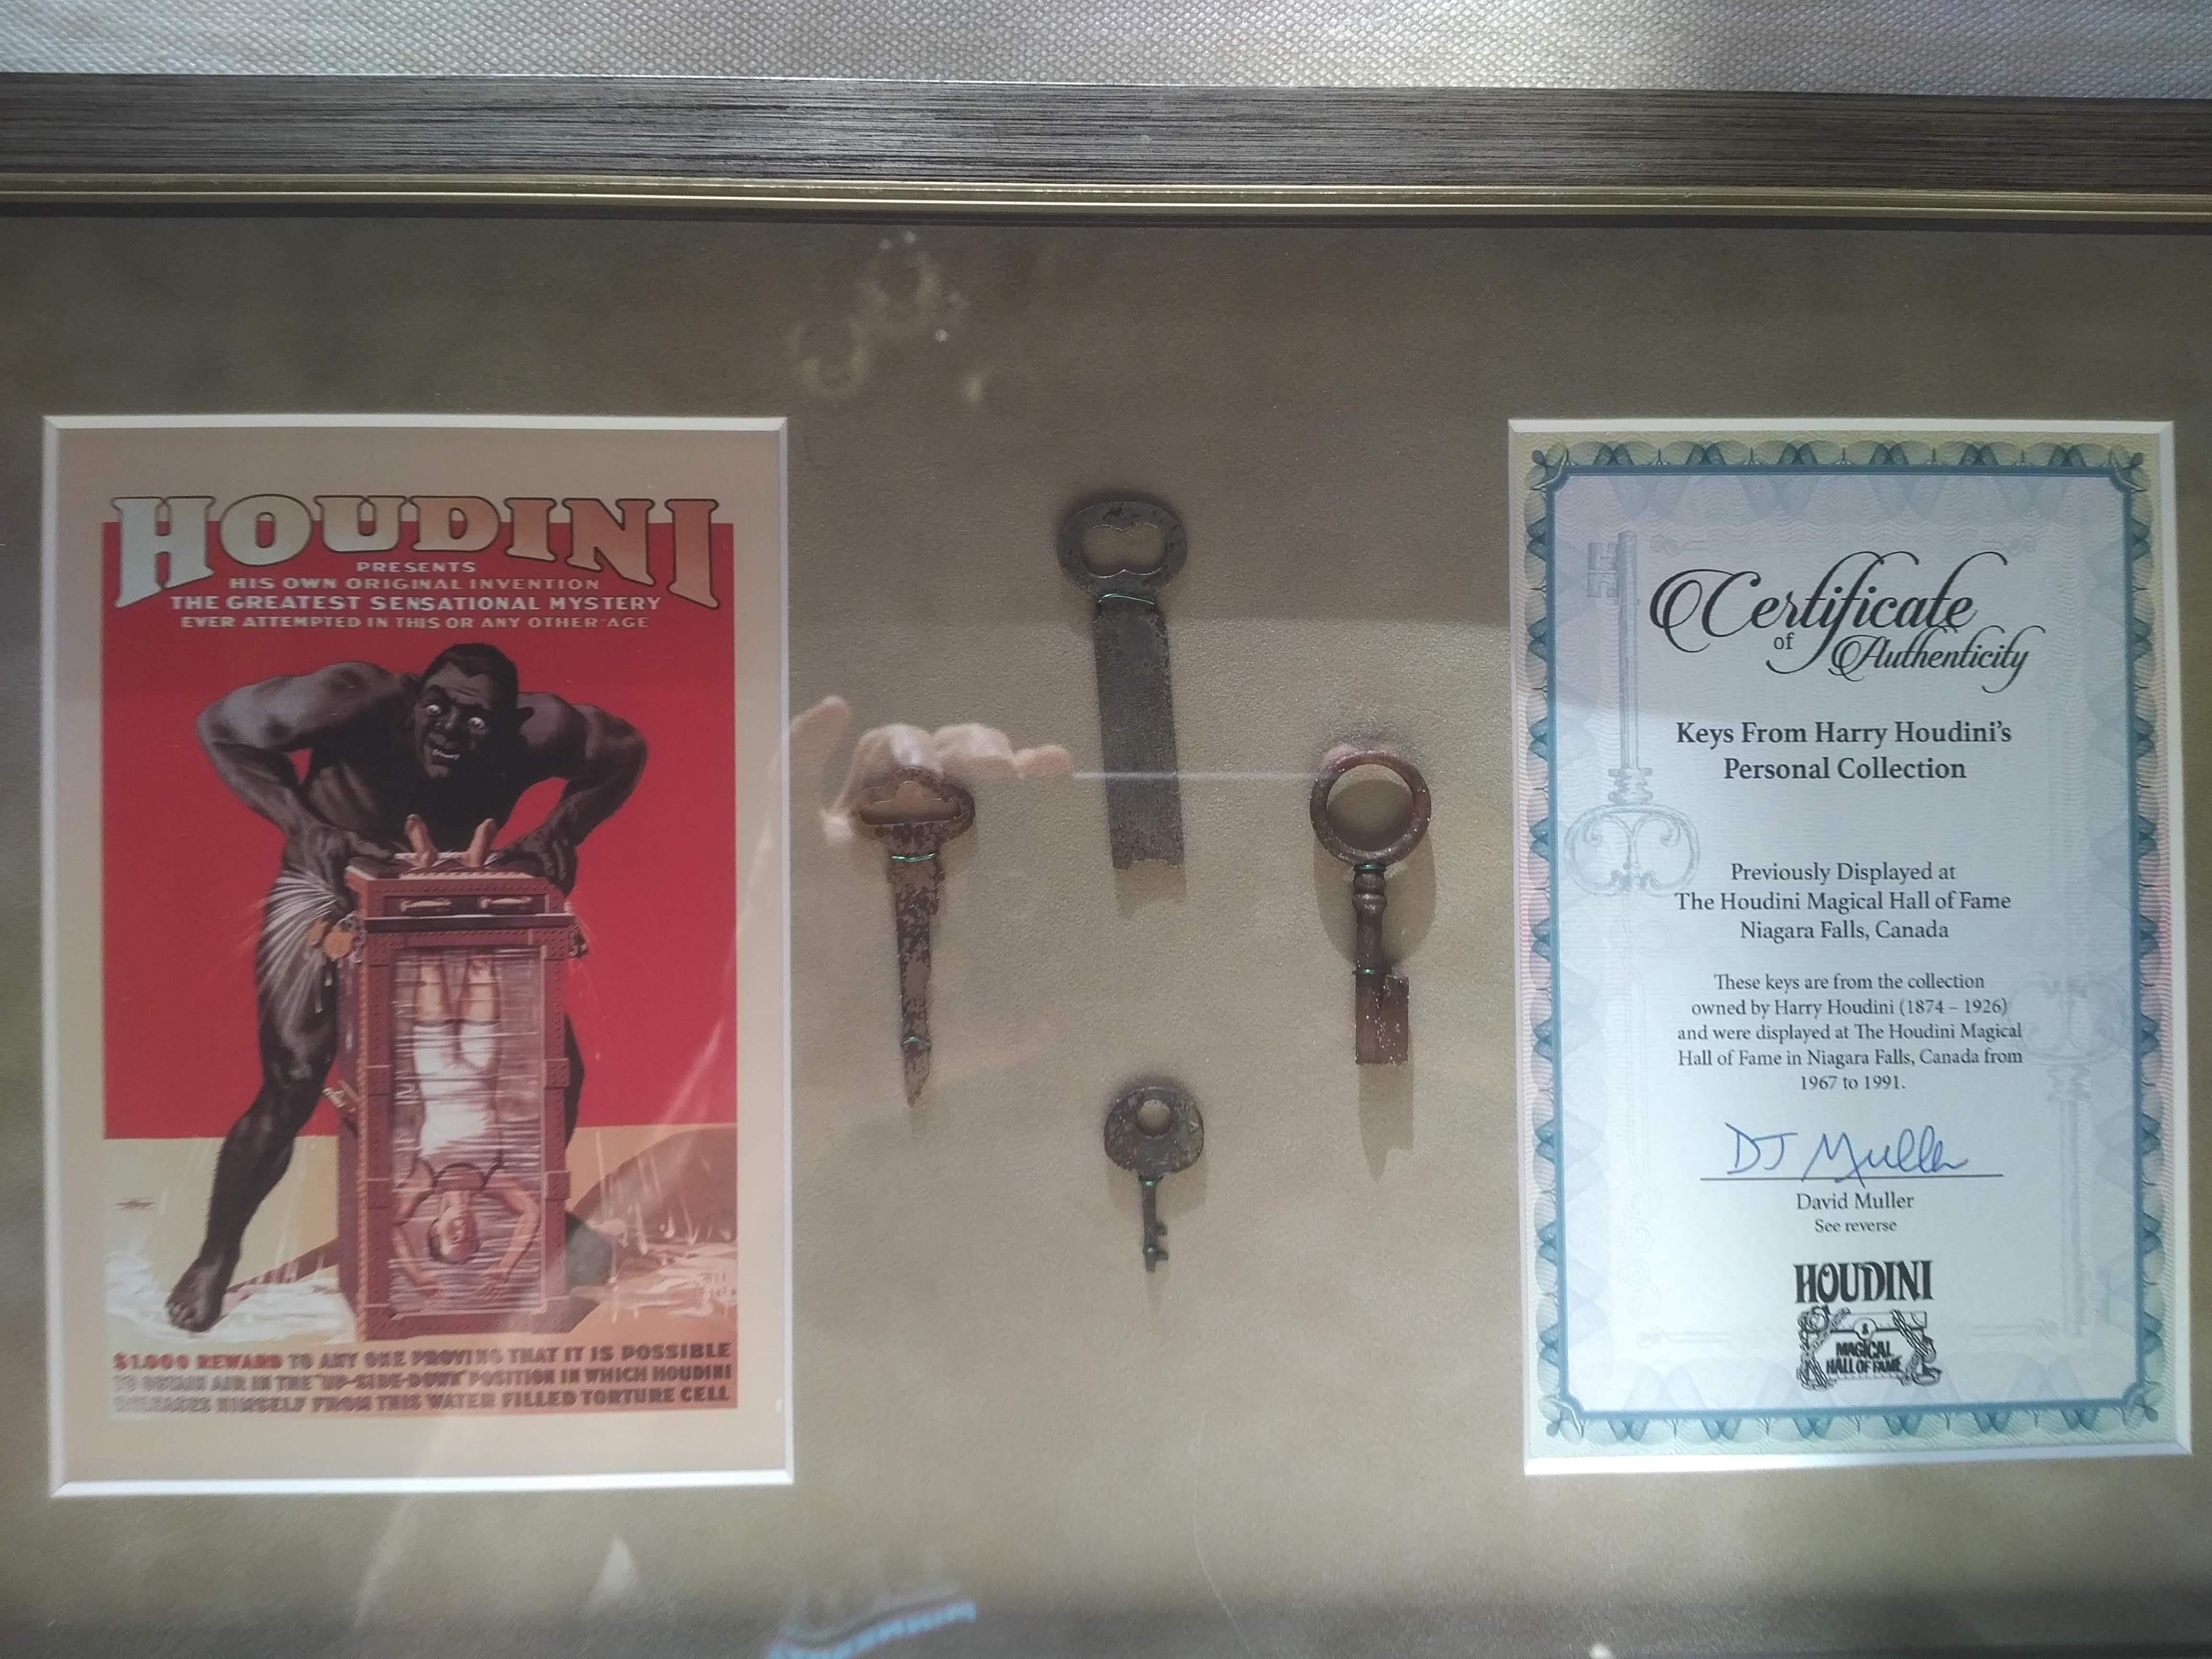 Original Houdini Keys from Houdini Museum with Certificate of Authenticity - Realist Art by Harry Houdini